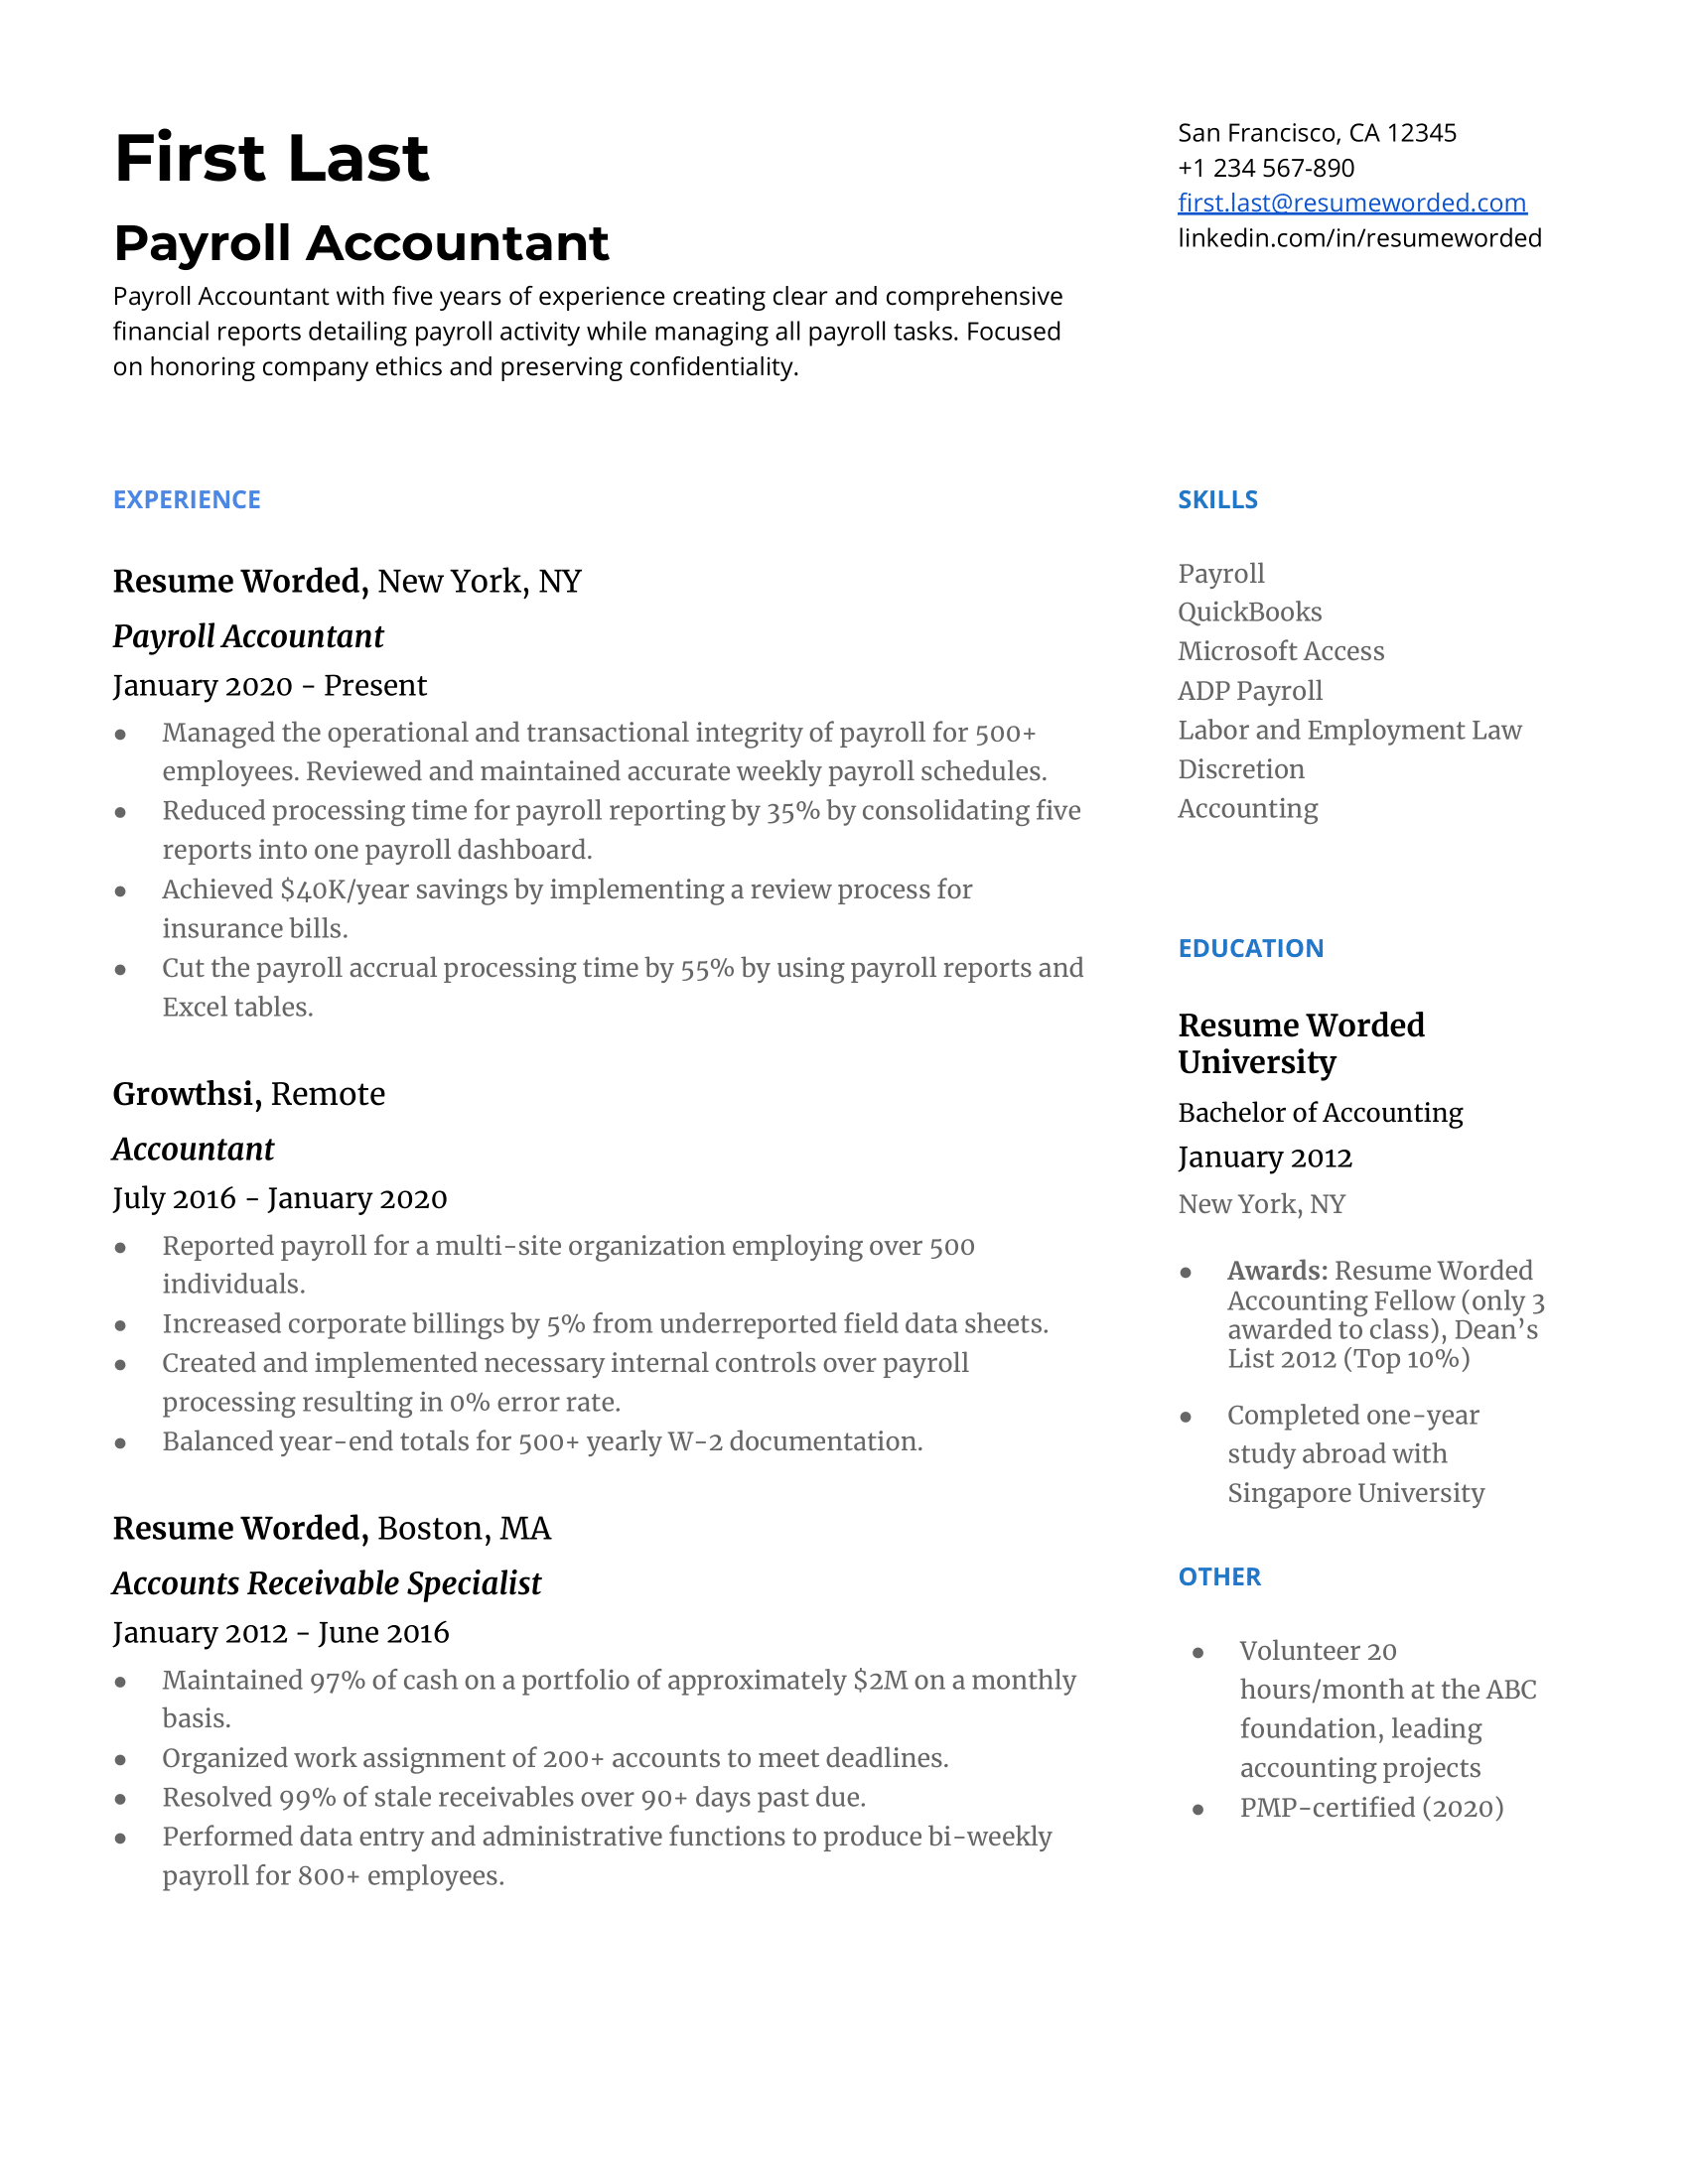 Payroll Accountant Resume Template + Example